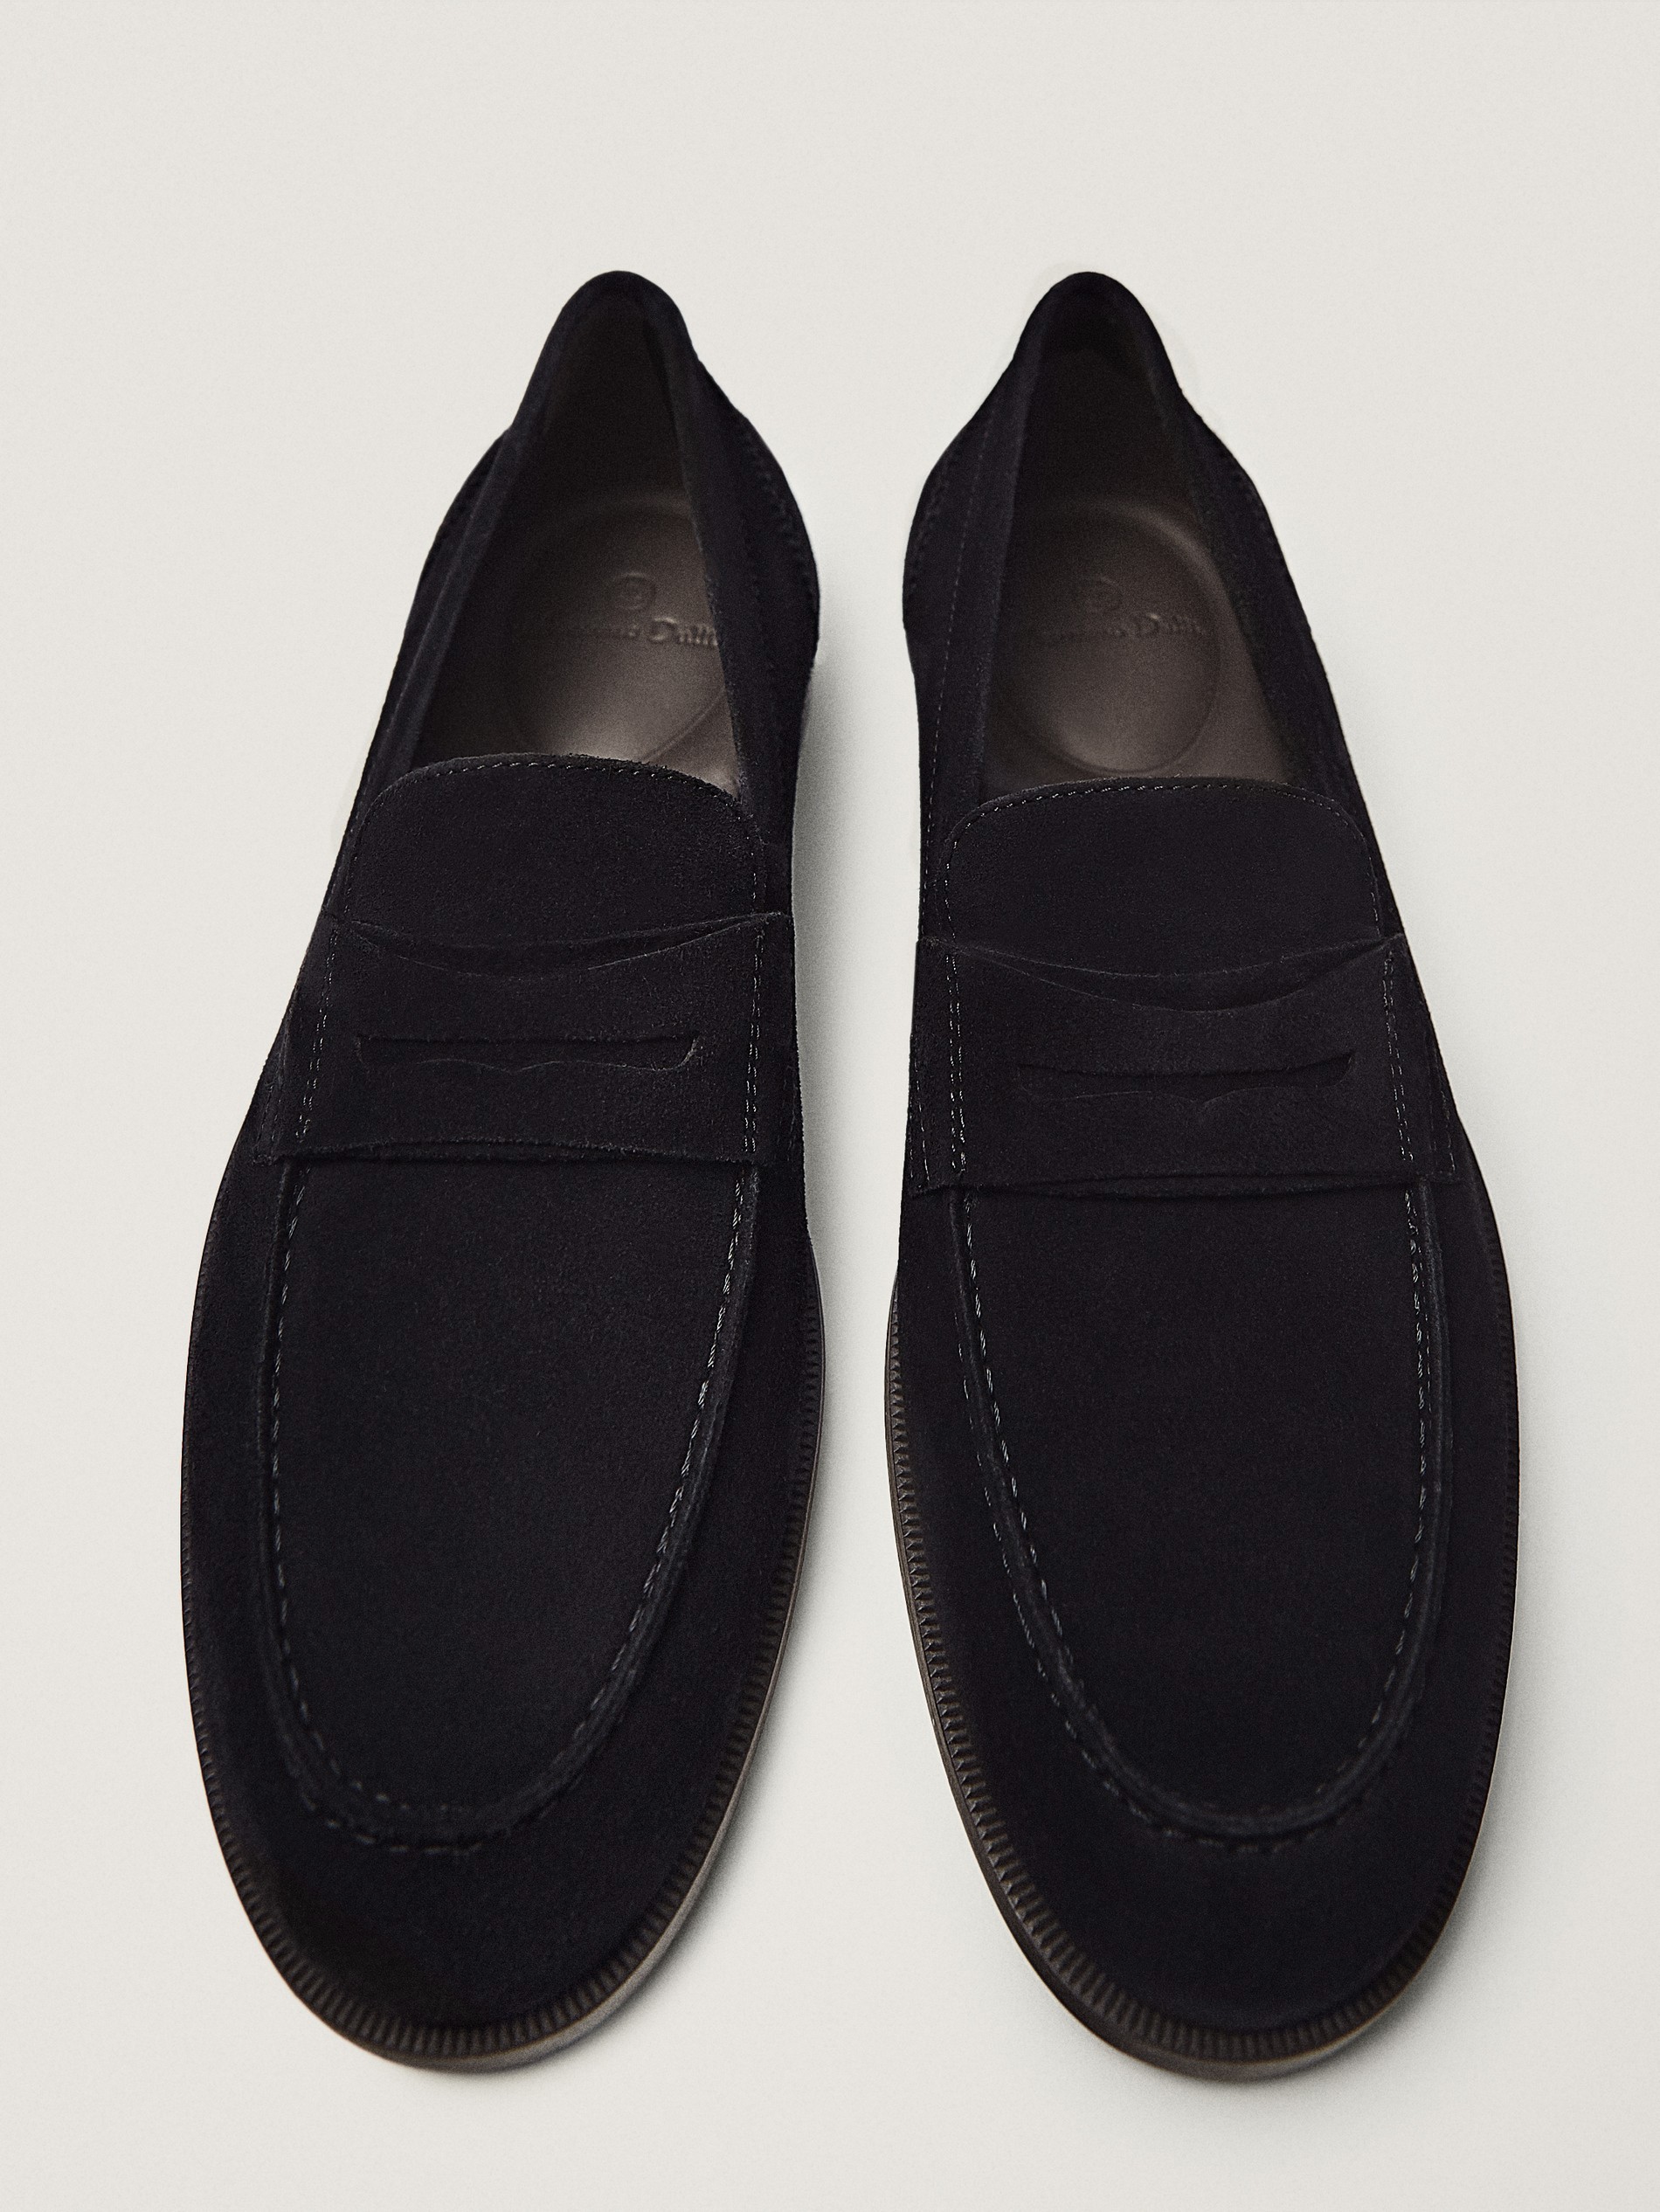 navy blue penny loafers